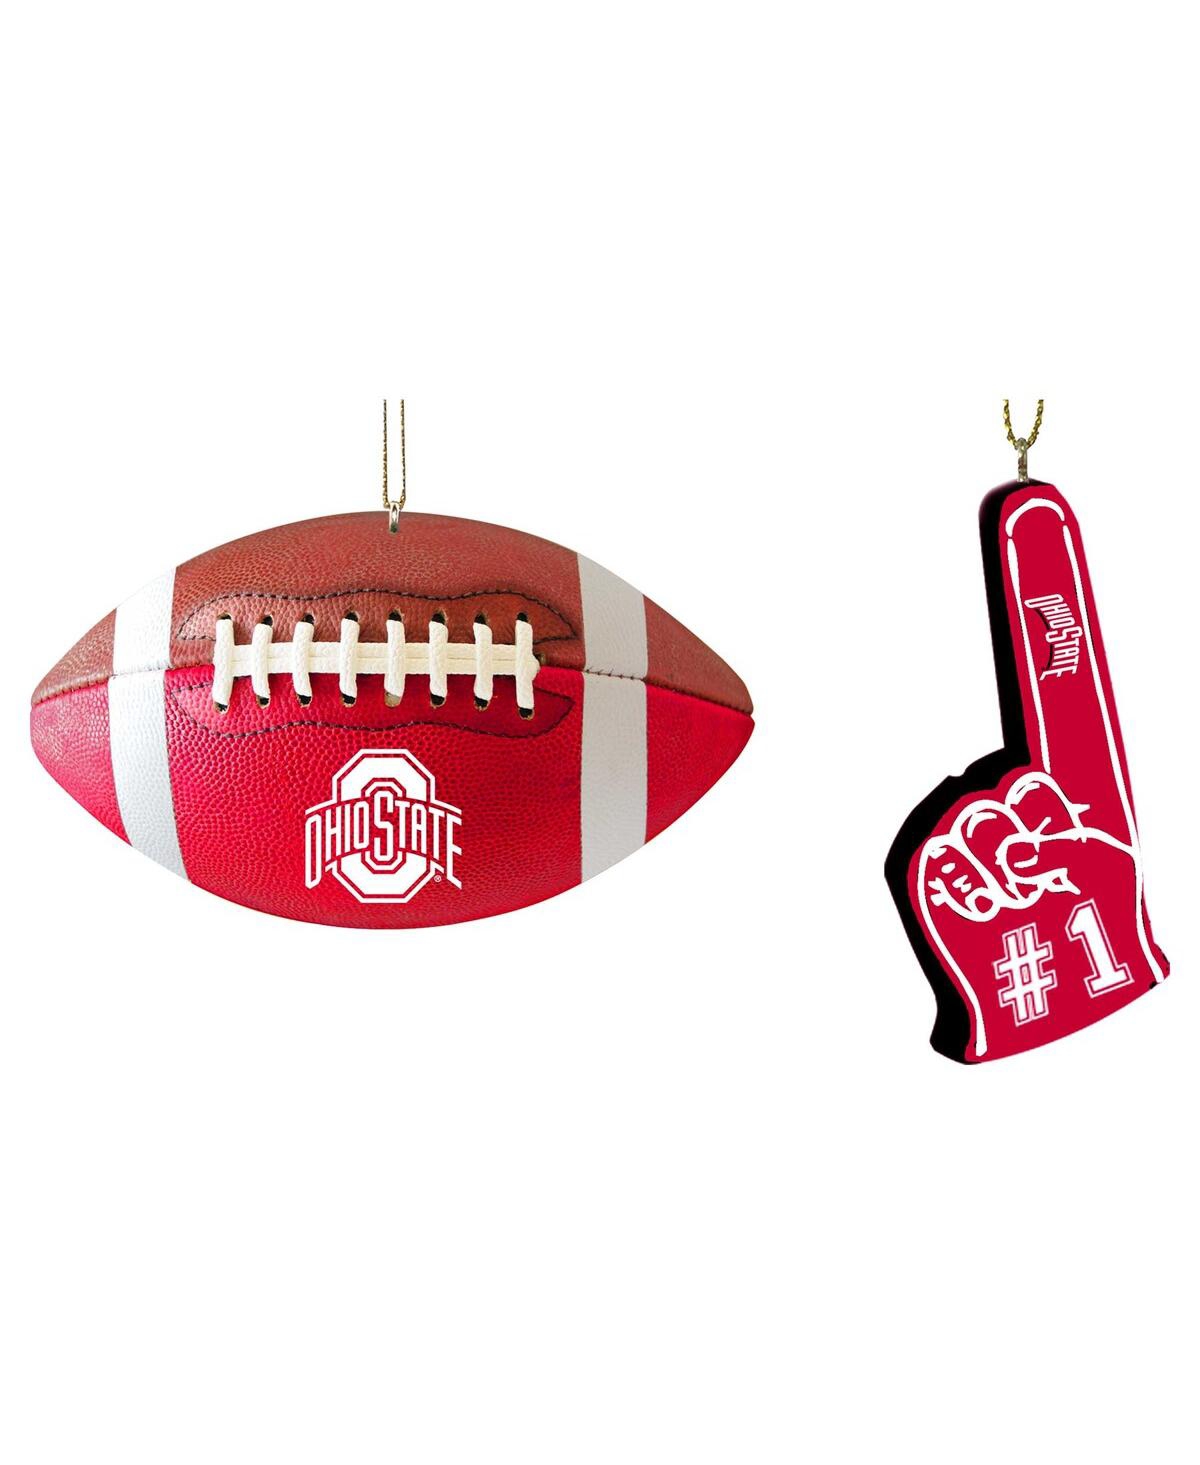 The Memory Company Ohio State Buckeyes Football and Foam Finger Ornament Two-Pack - Red